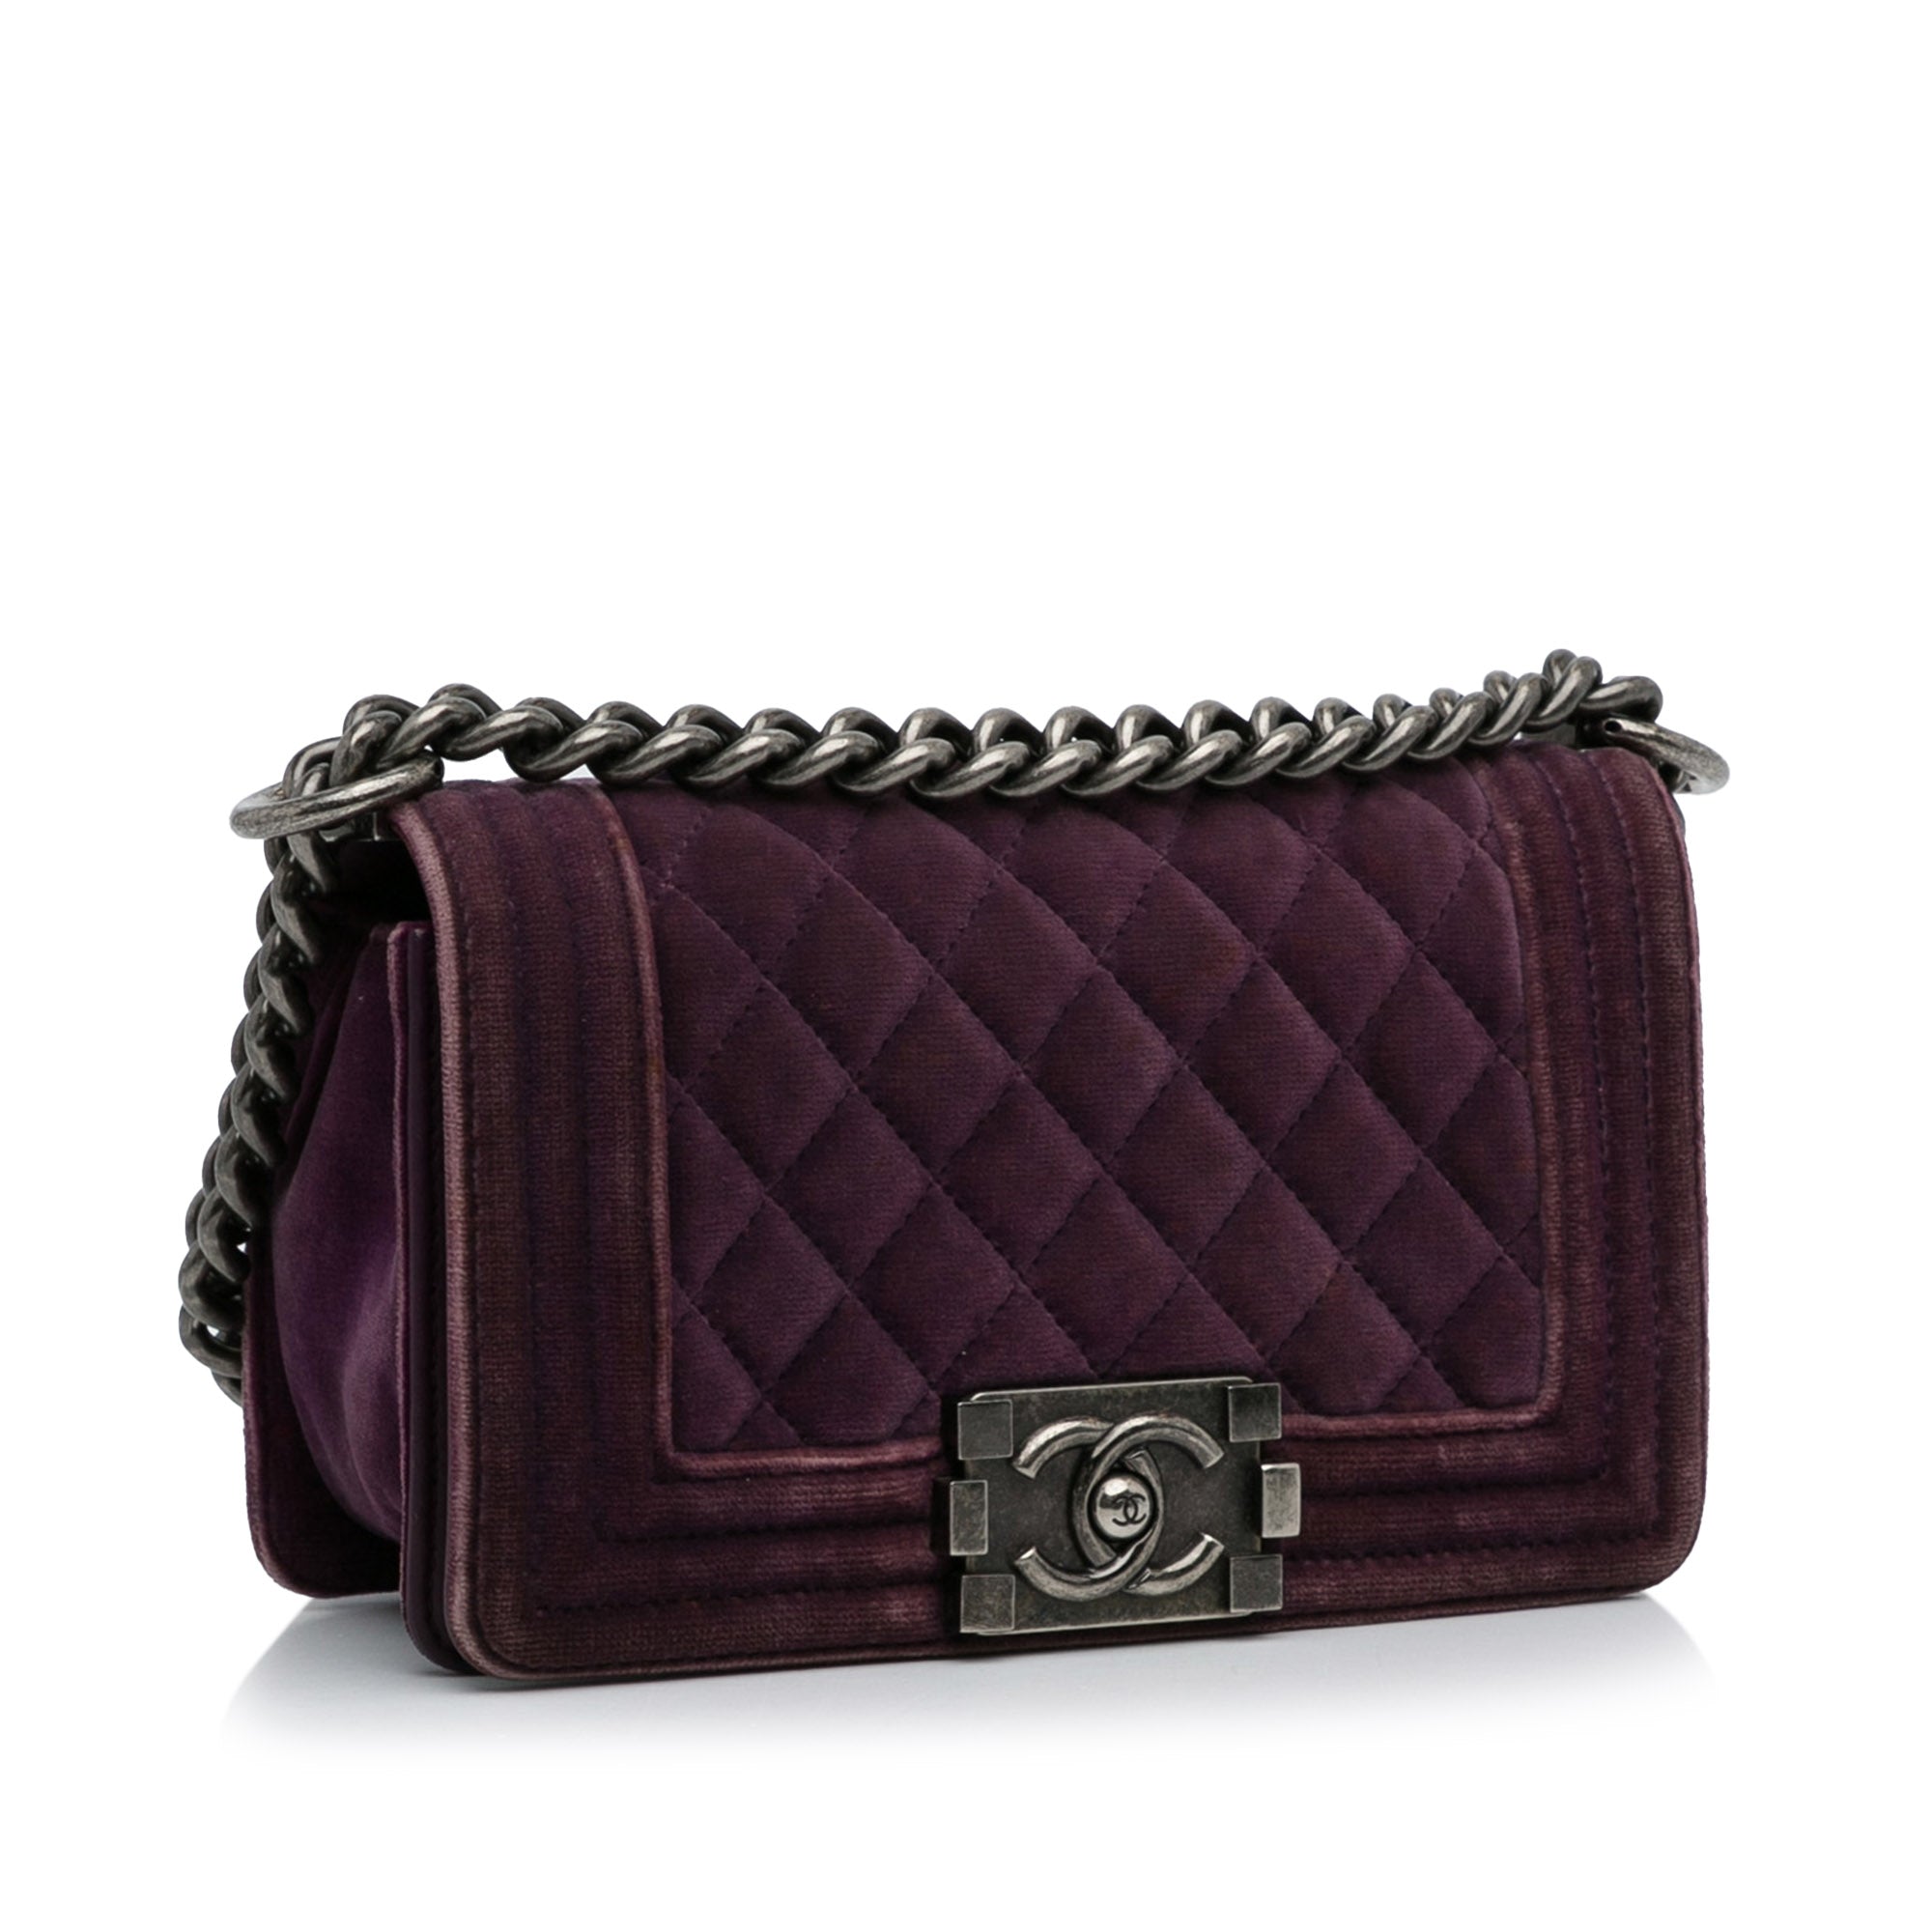 Chanel Purple Quilted Patent Leather Old Medium Boy Bag, myGemma